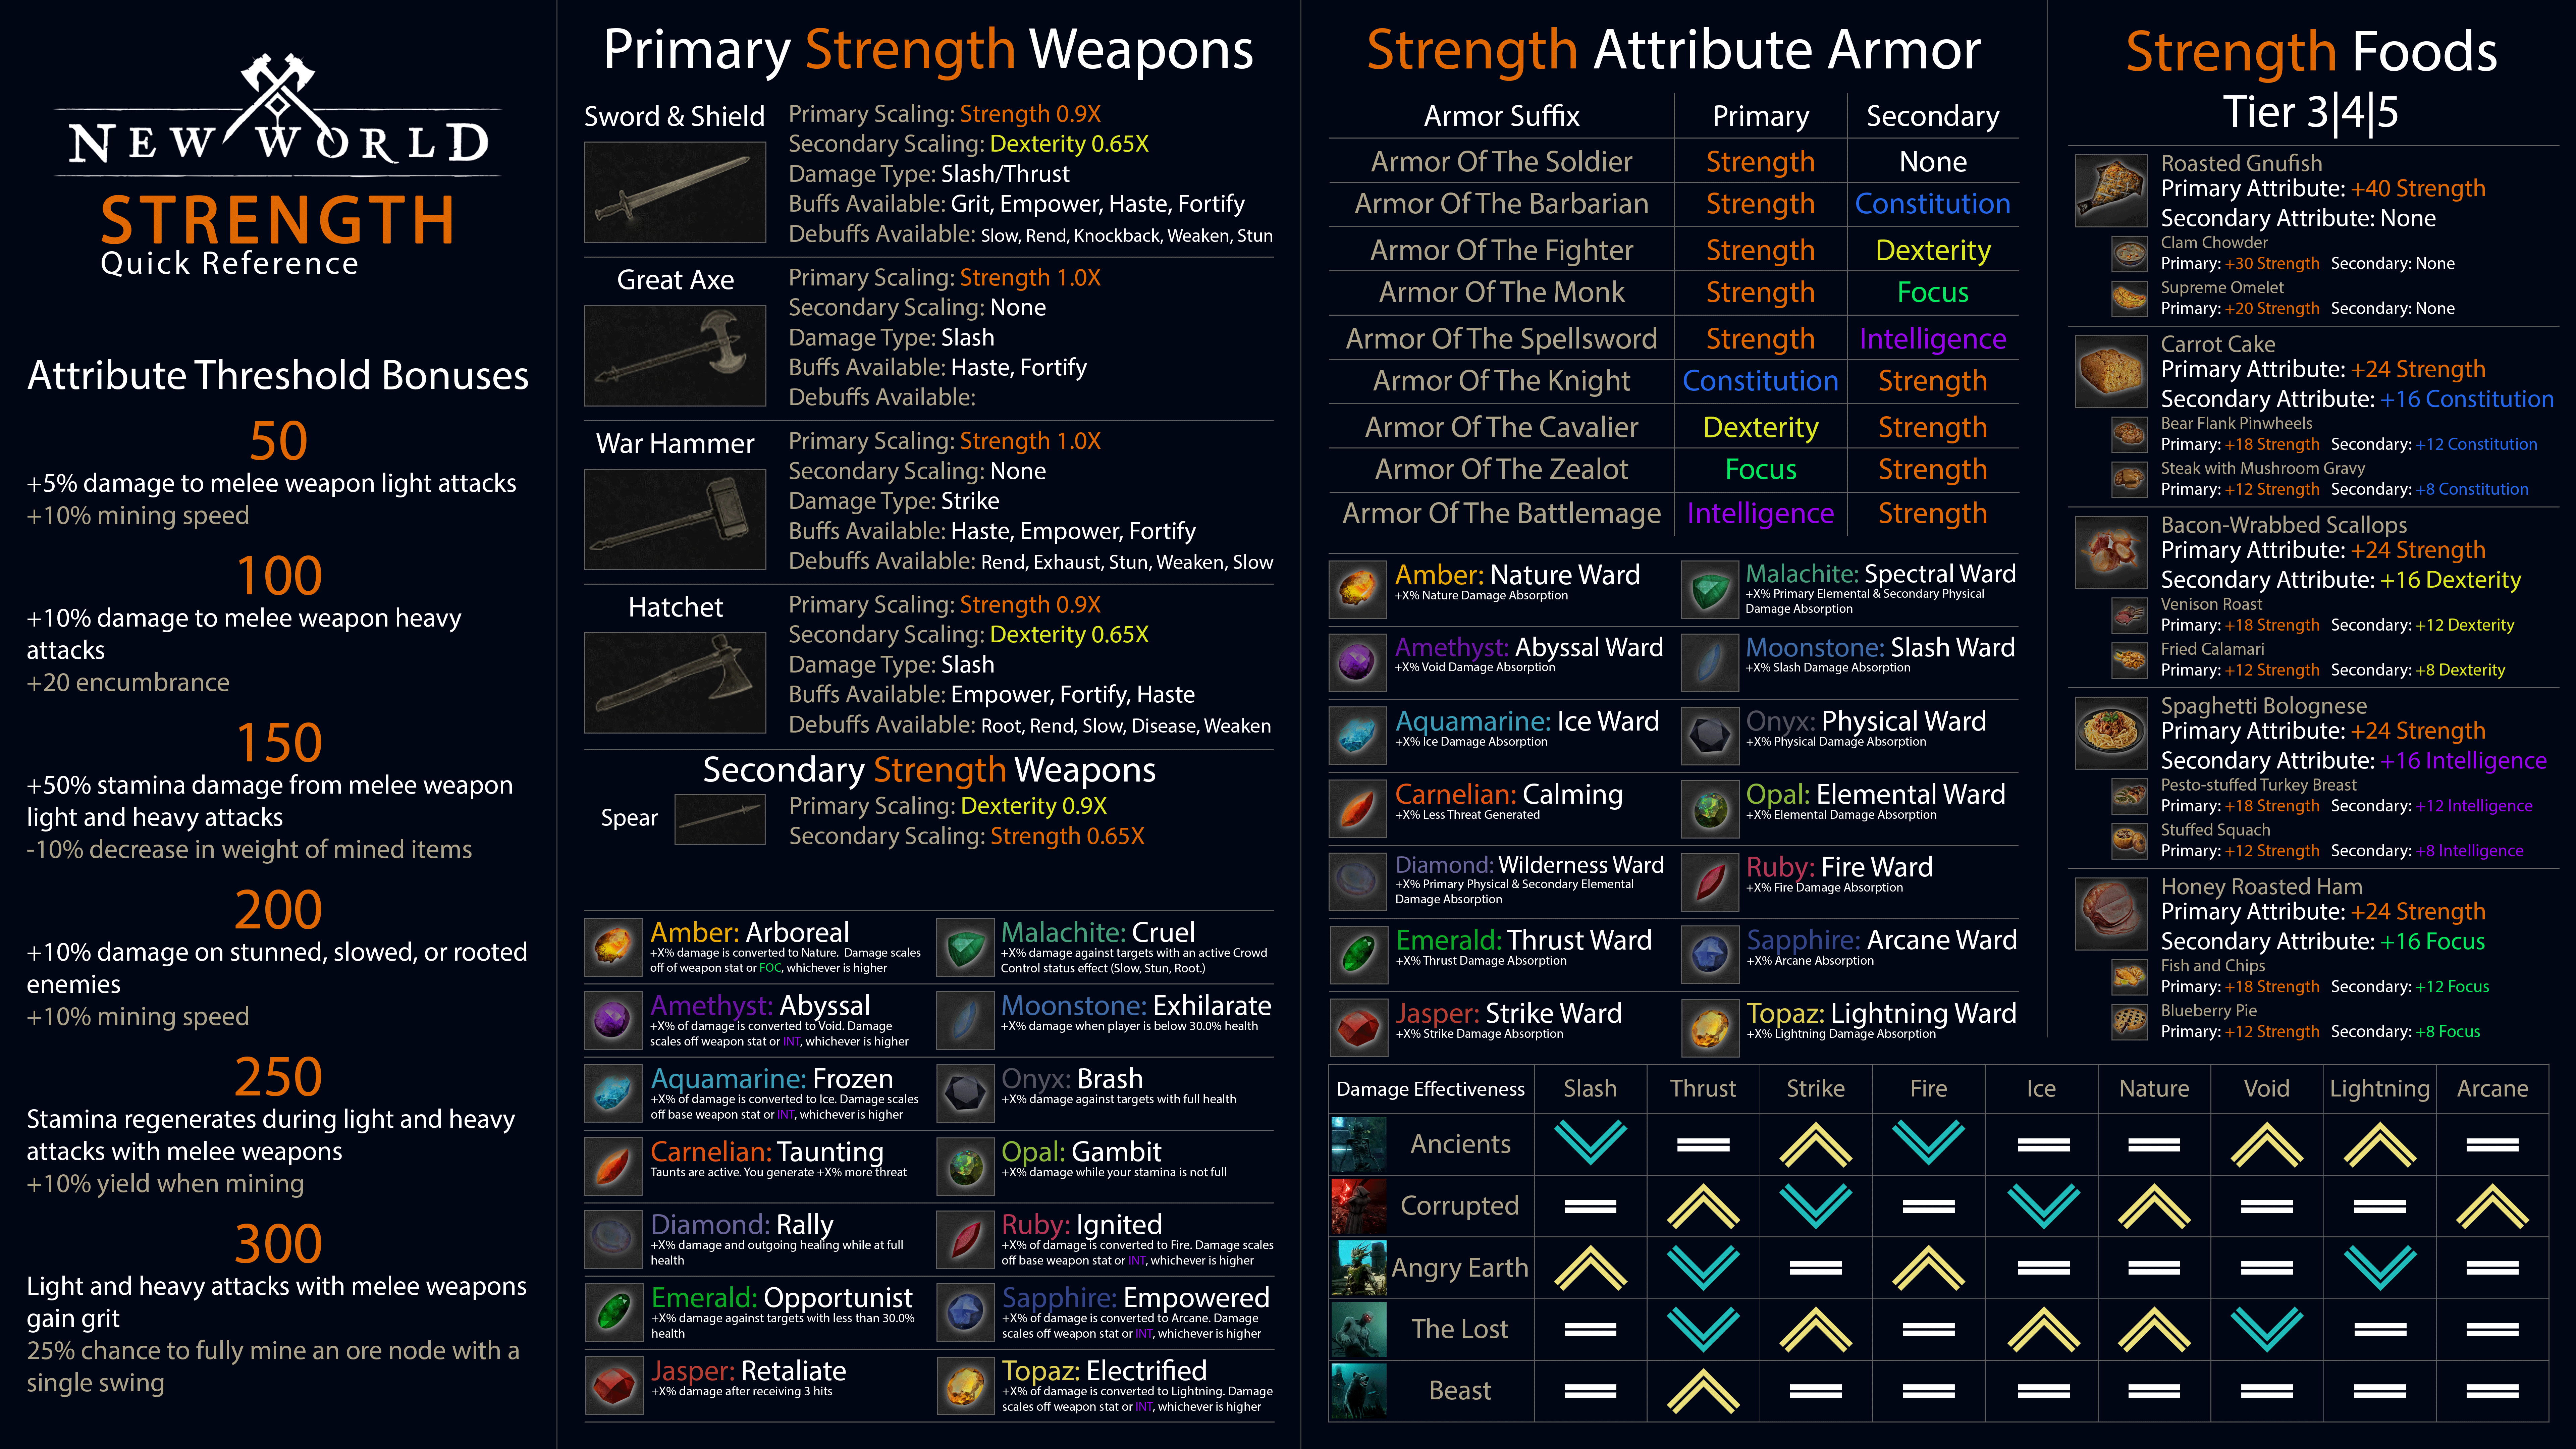 Strength Attribute Reference